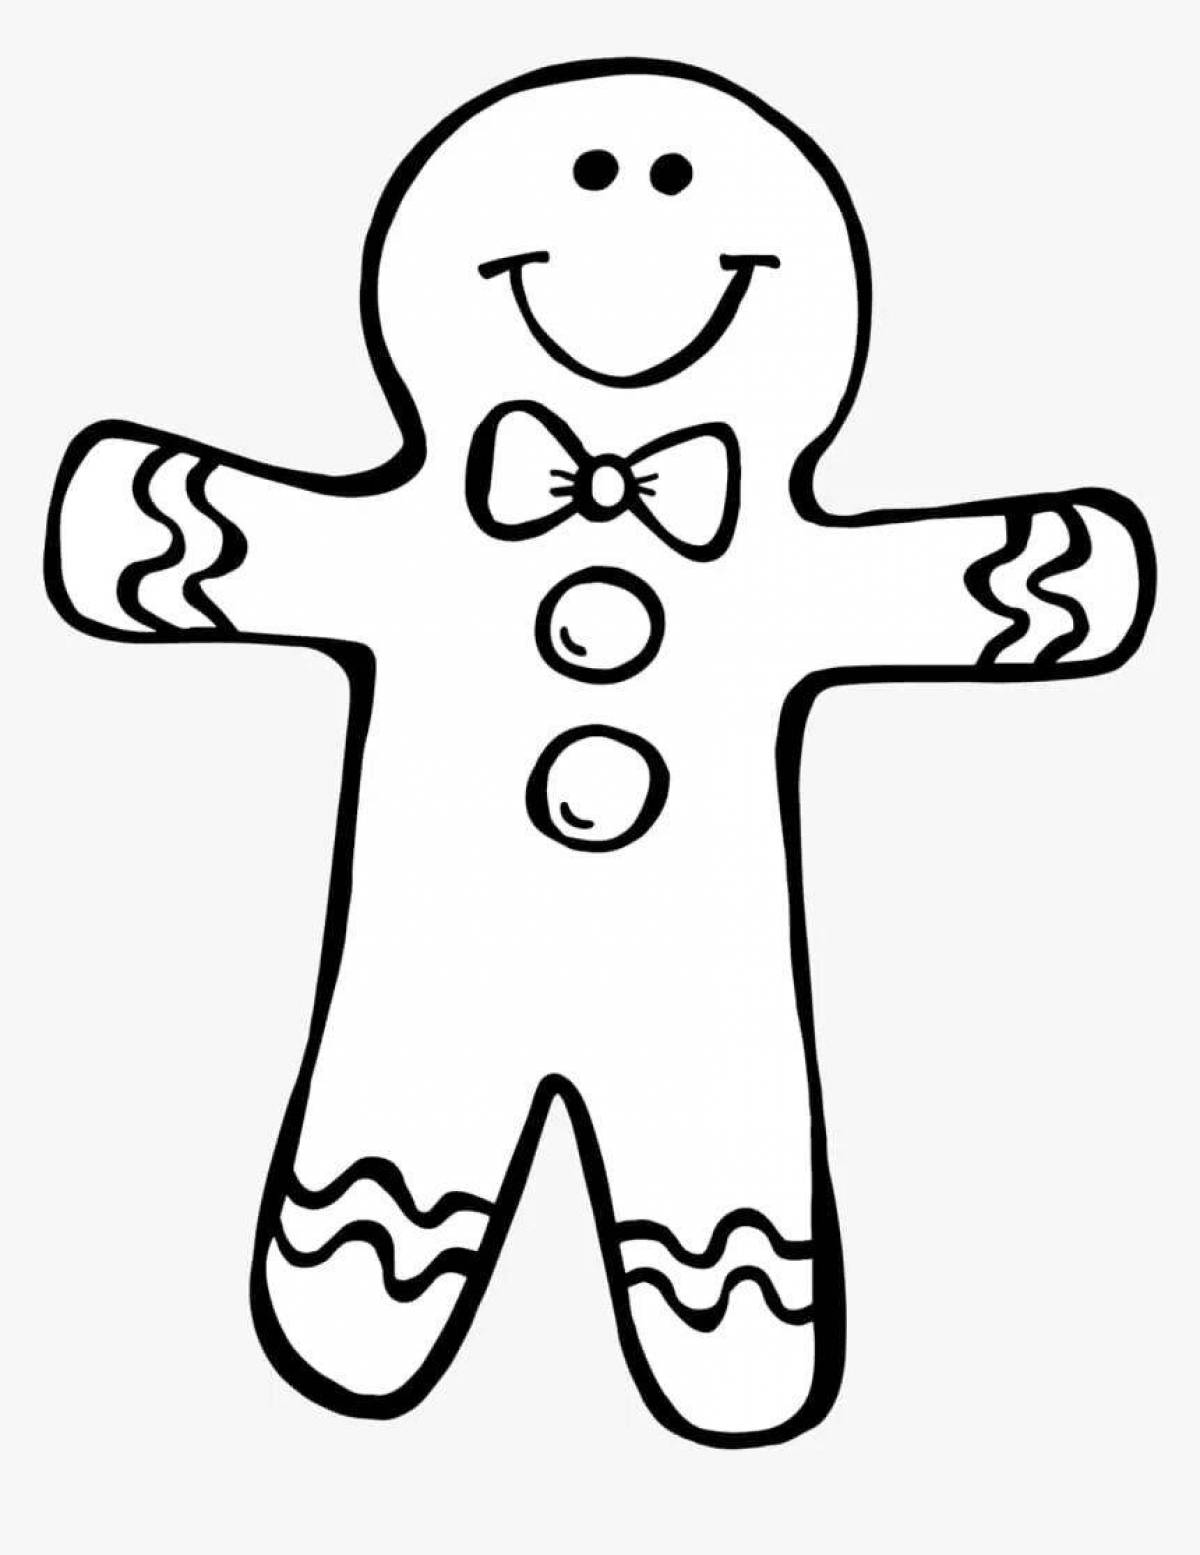 Coloring page festive gingerbread man